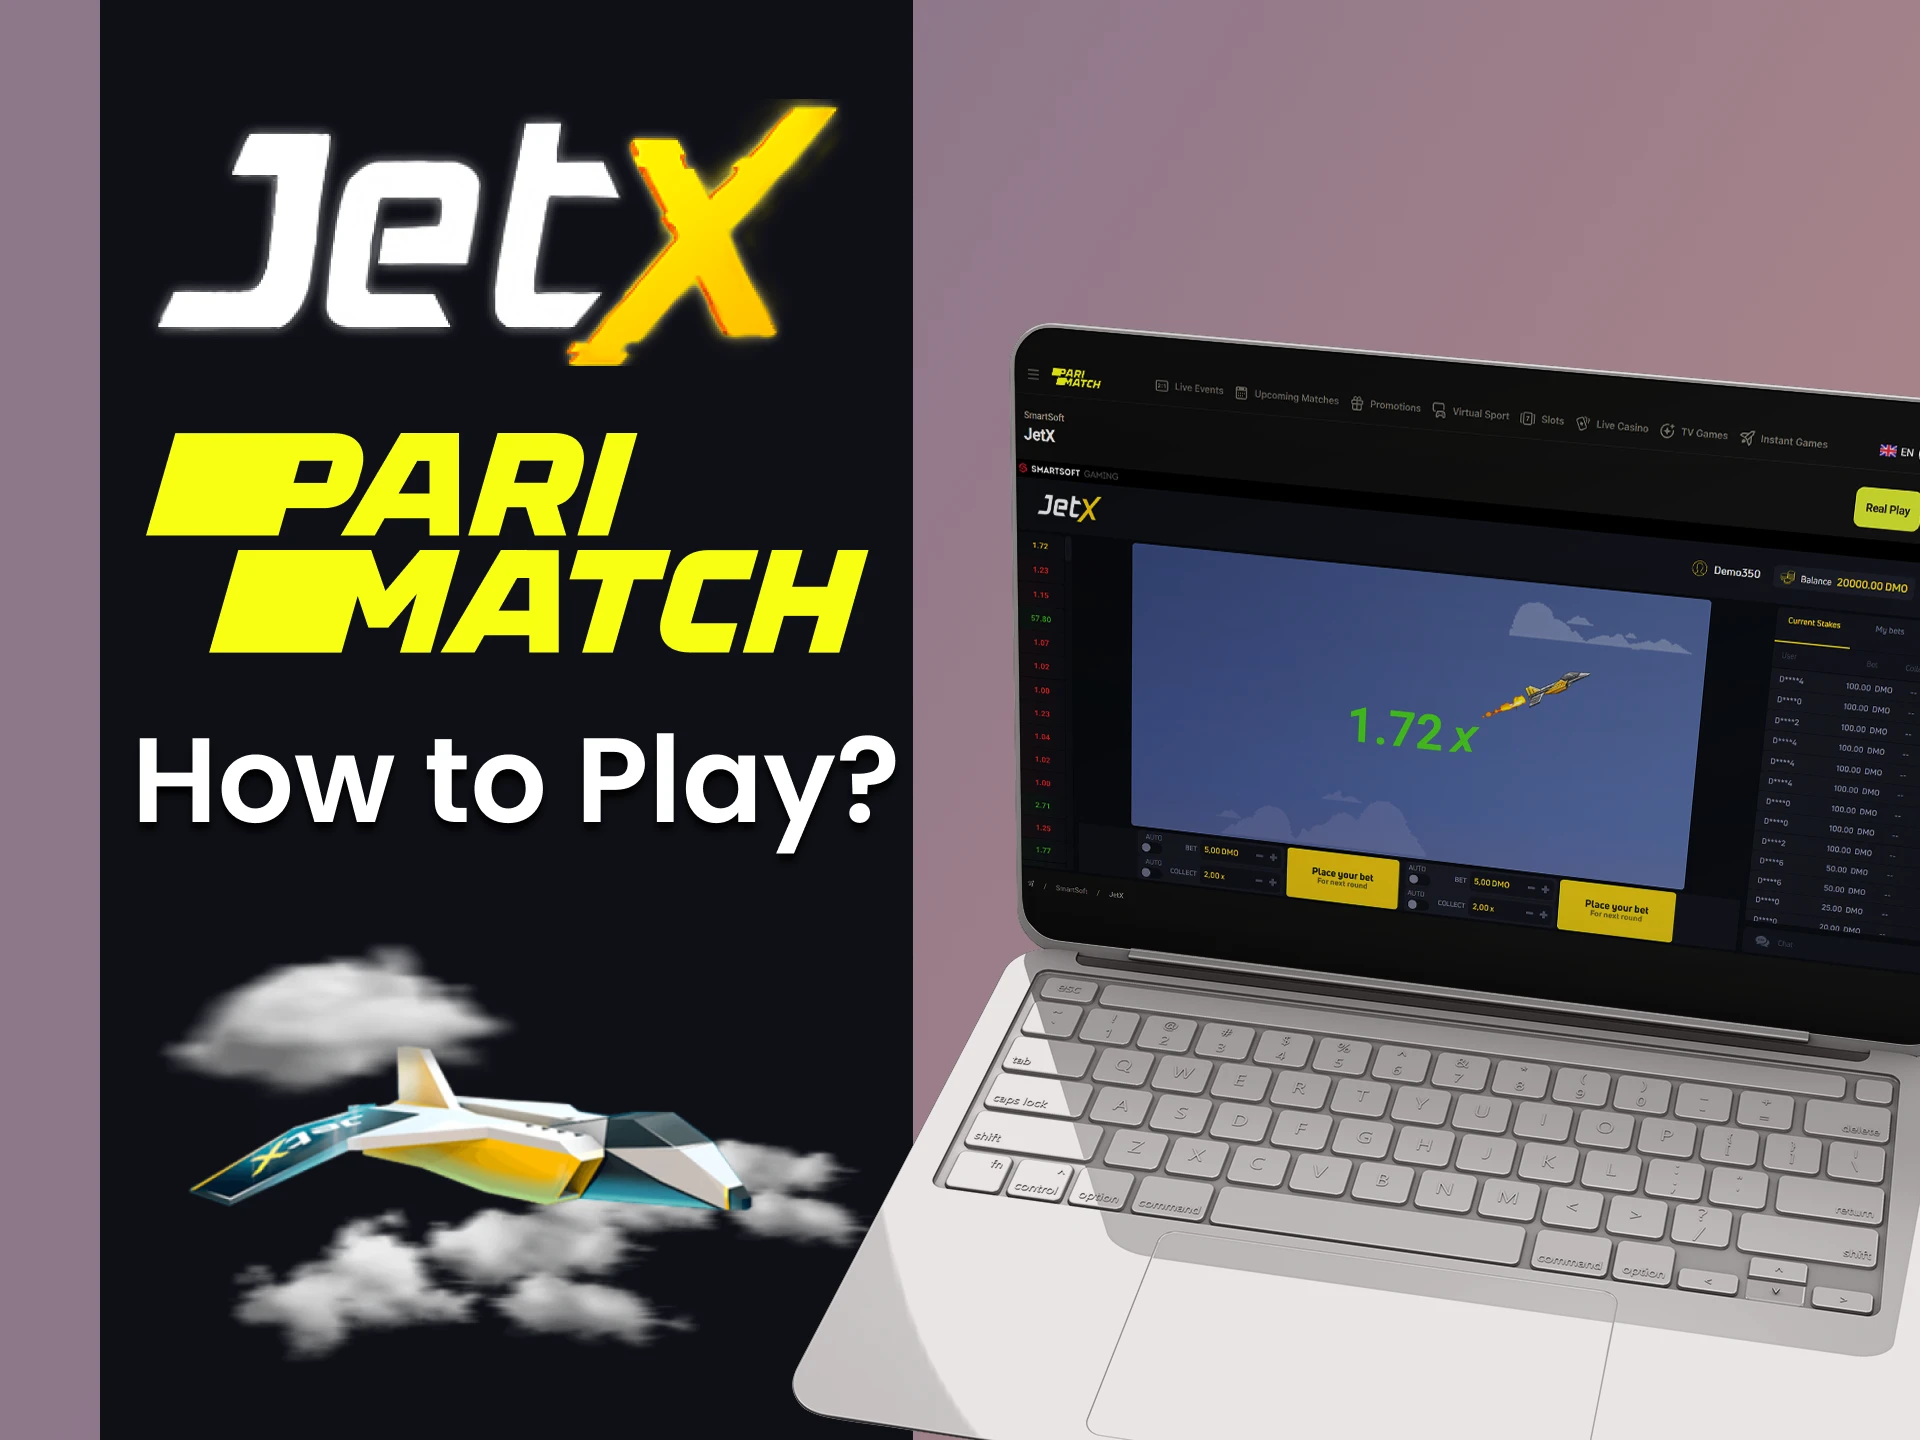 Go to the casino section to play JetX on Parimatch.